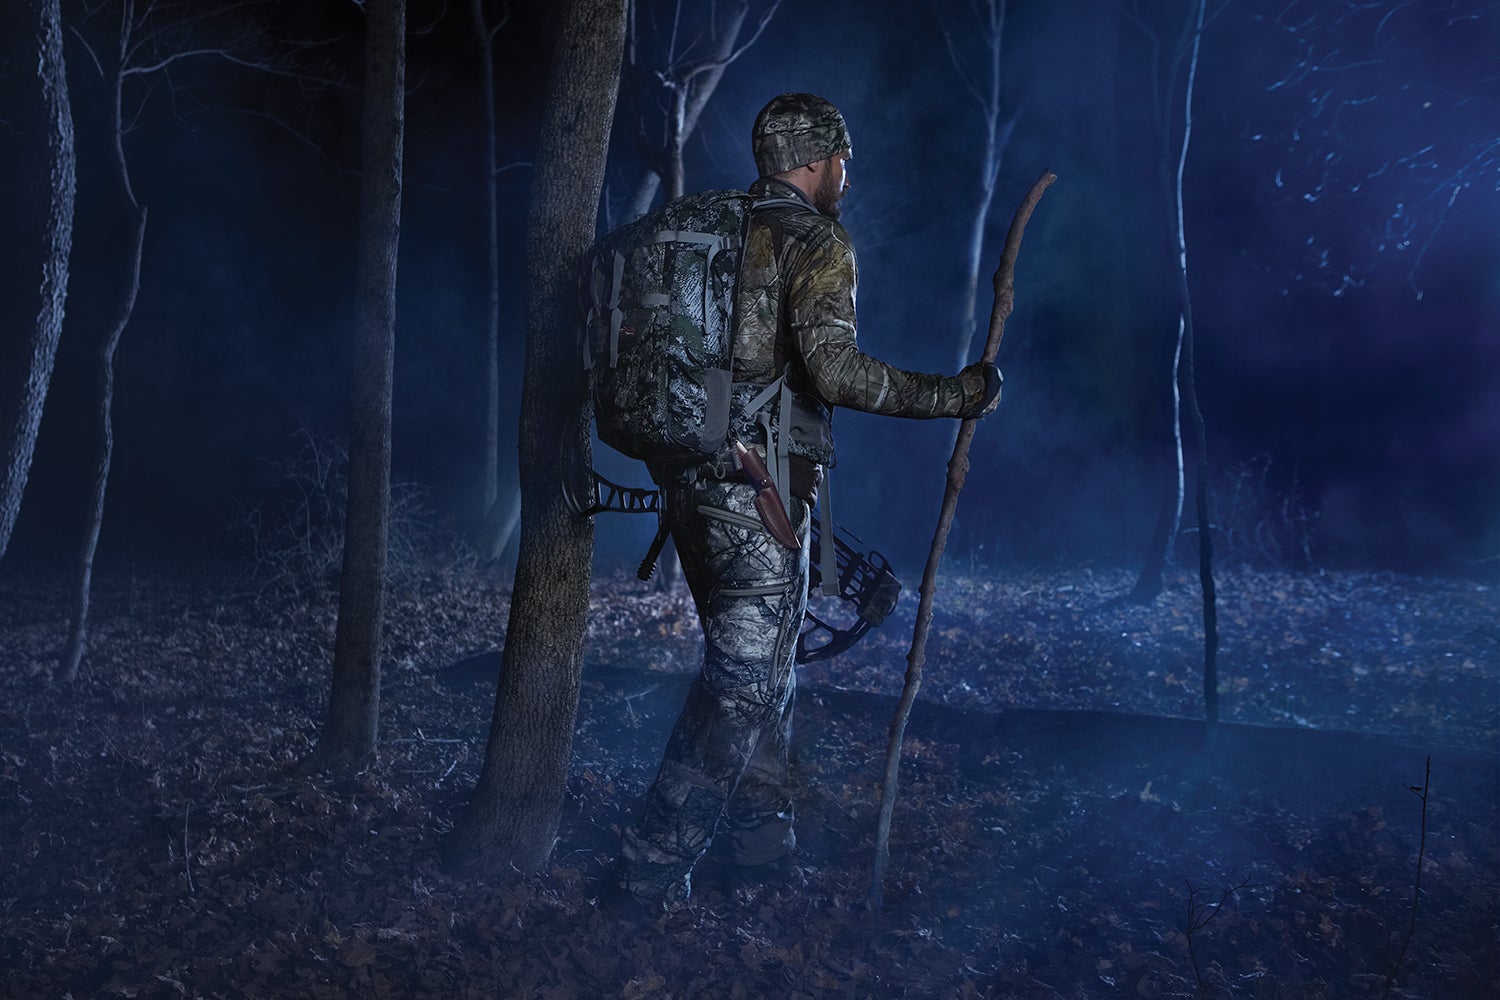 camo-clad hunter hikes through woods in long before dawn